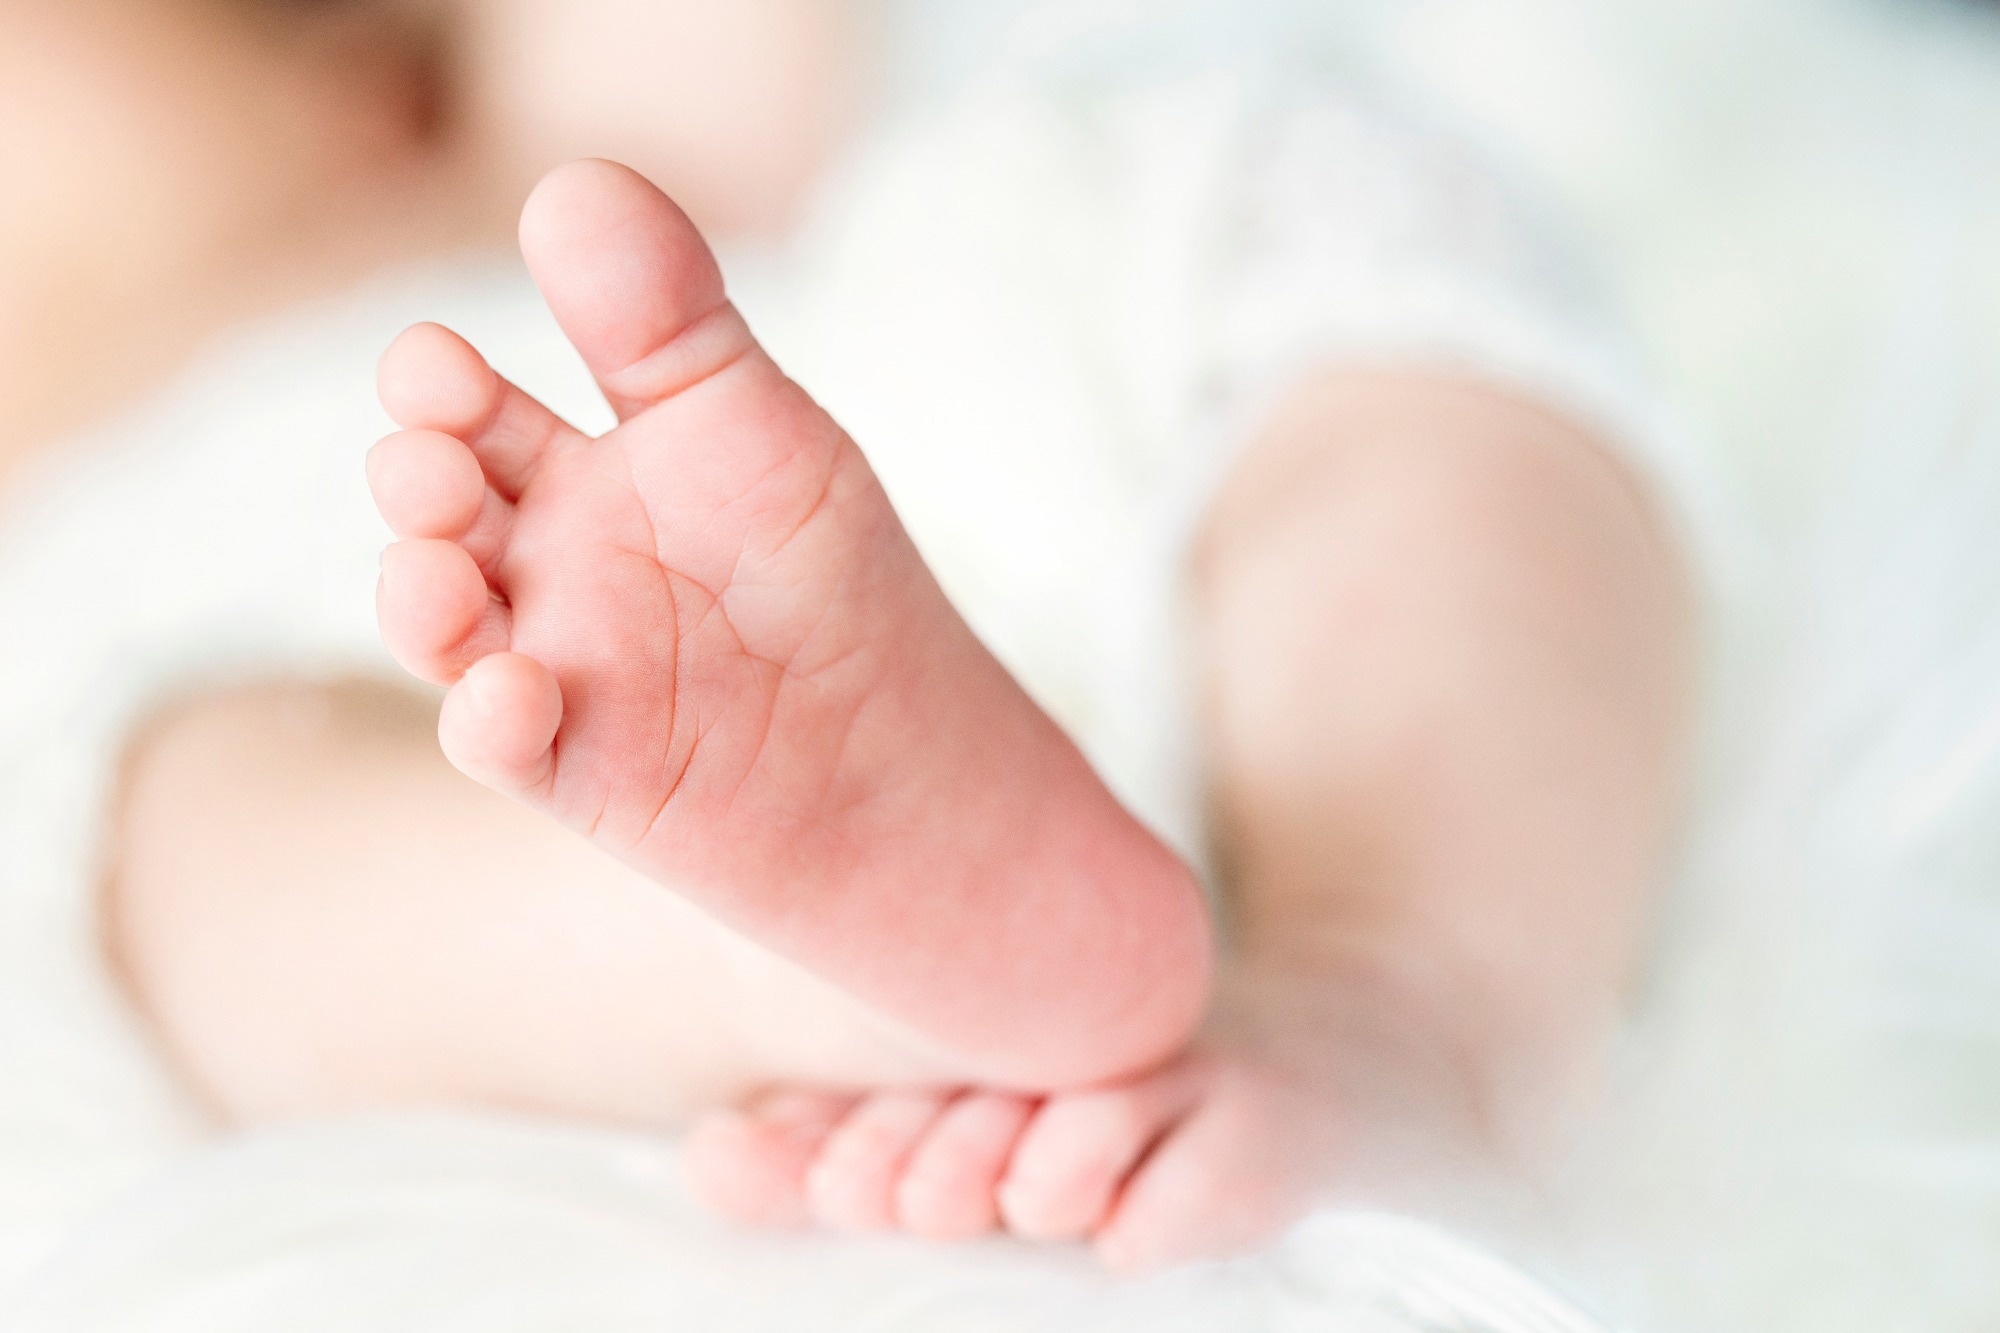 Study: Small babies, big risks: global estimates of prevalence and mortality for vulnerable newborns to accelerate change and improve counting. Image Credit: fradis_photo/Shutterstock.com